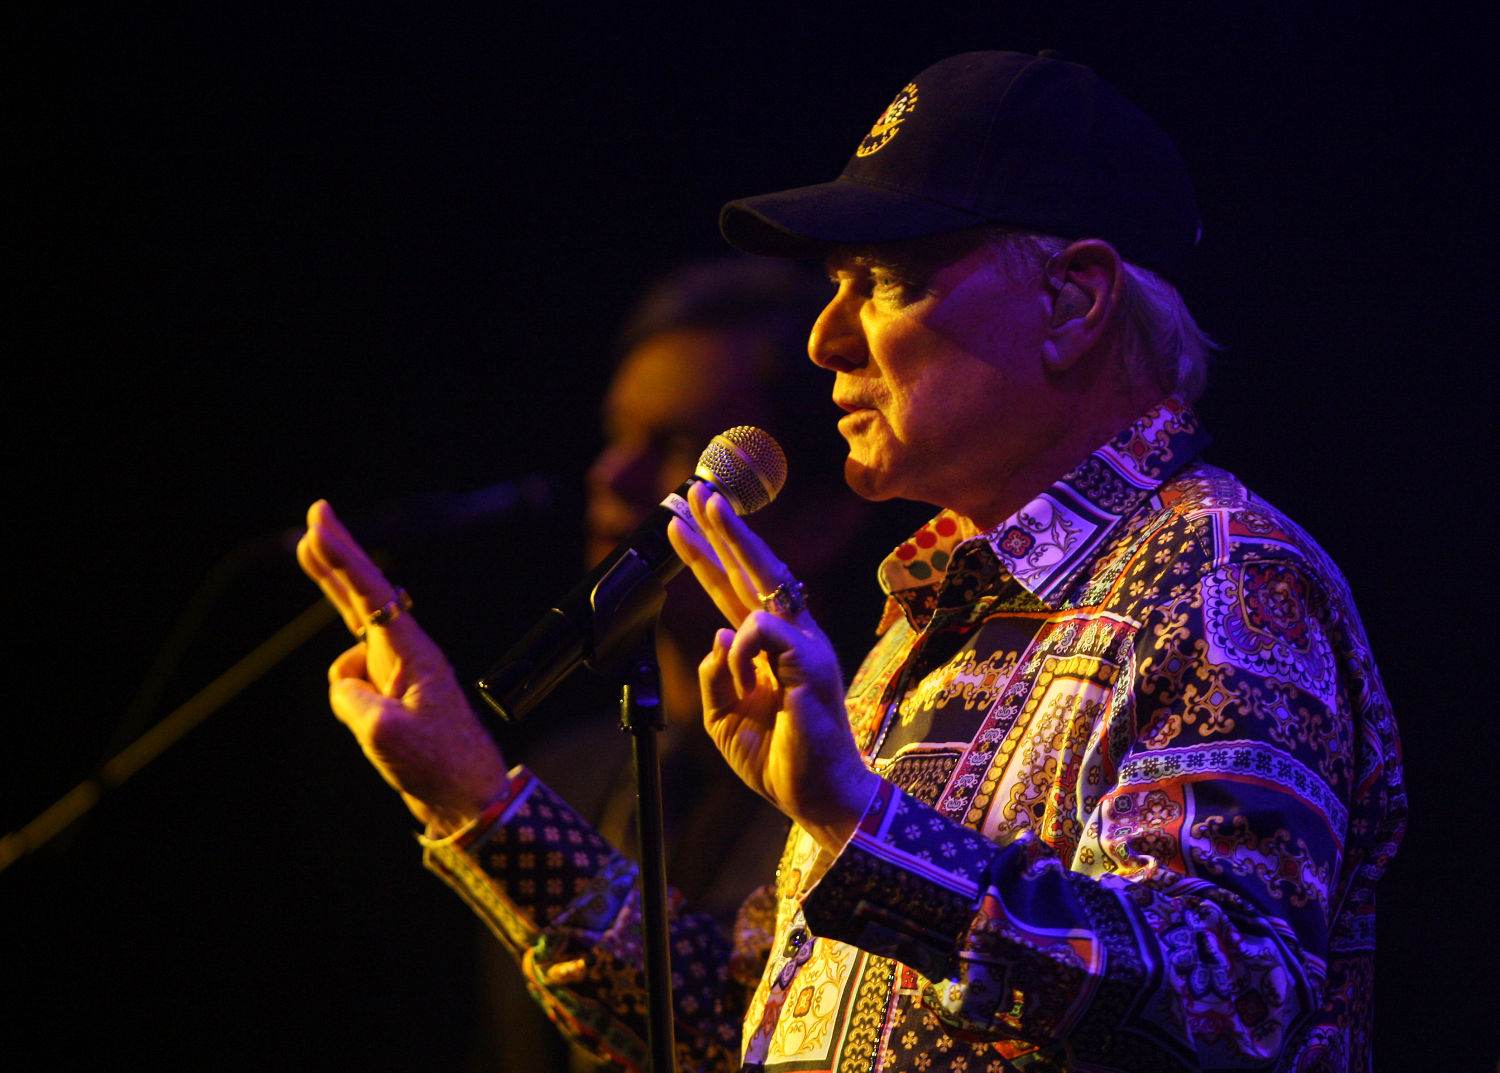 Original band member Mike Love and The Beach Boys perform at the Mississippi Moon Bar inside the Diamond Jo Casino, in Dubuque, on Saturday. PHOTO CREDIT: Nicki Kohl